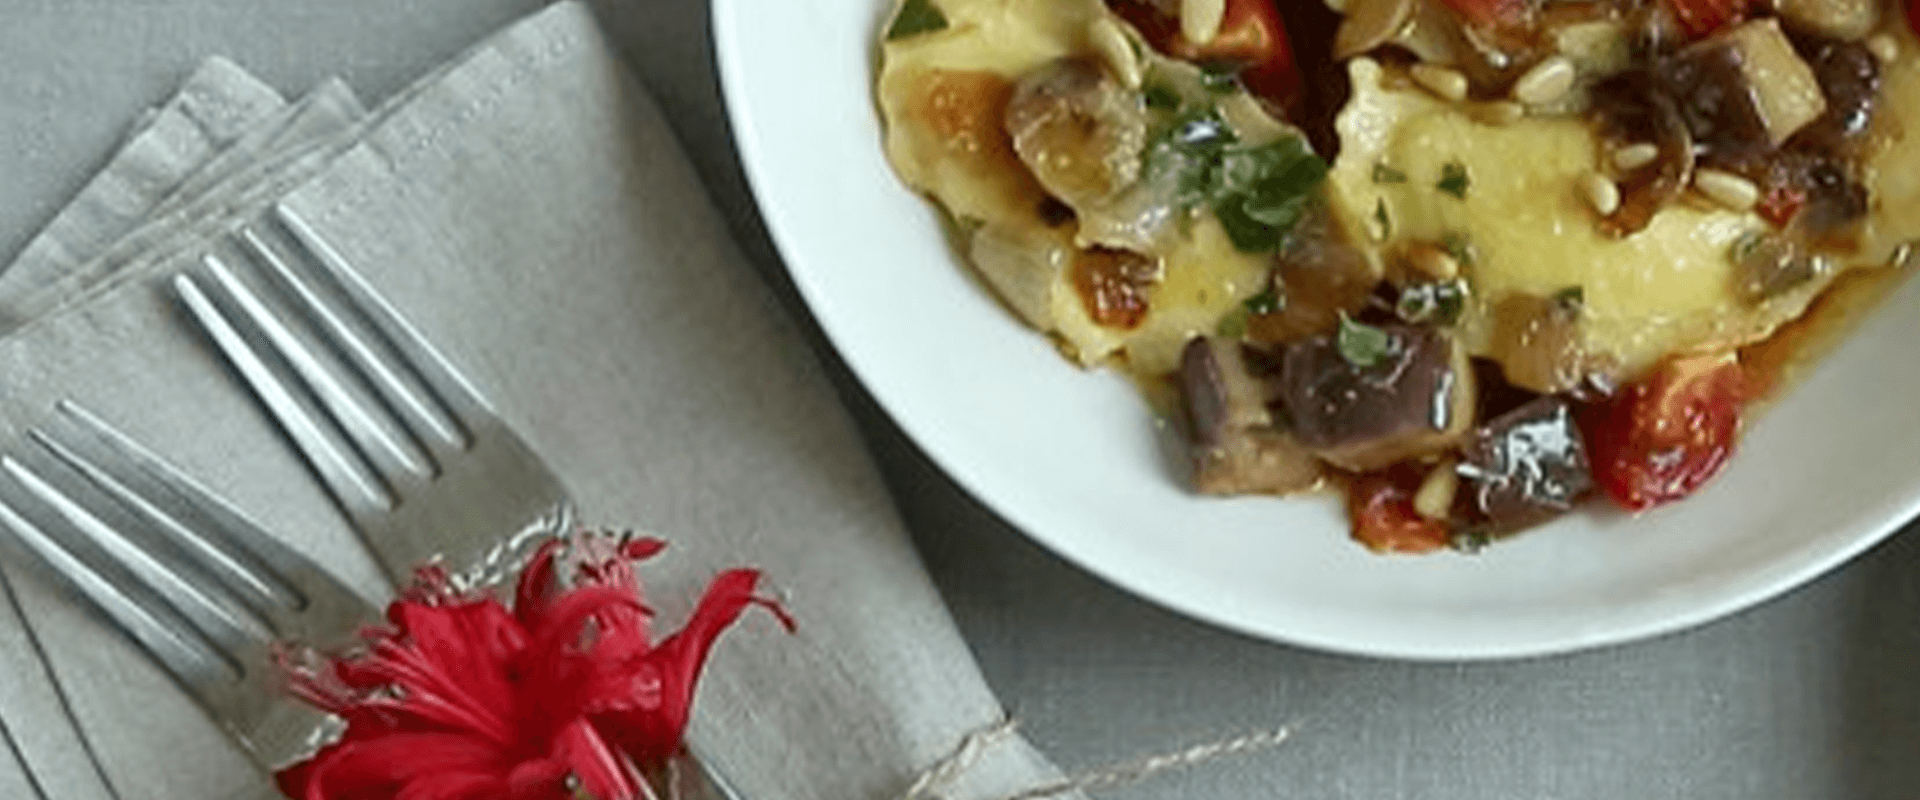 CA_BRAISED-BEEF-RAVIOLI-WITH-EGGPLANT-AND-TOMATOES_1920x800.png